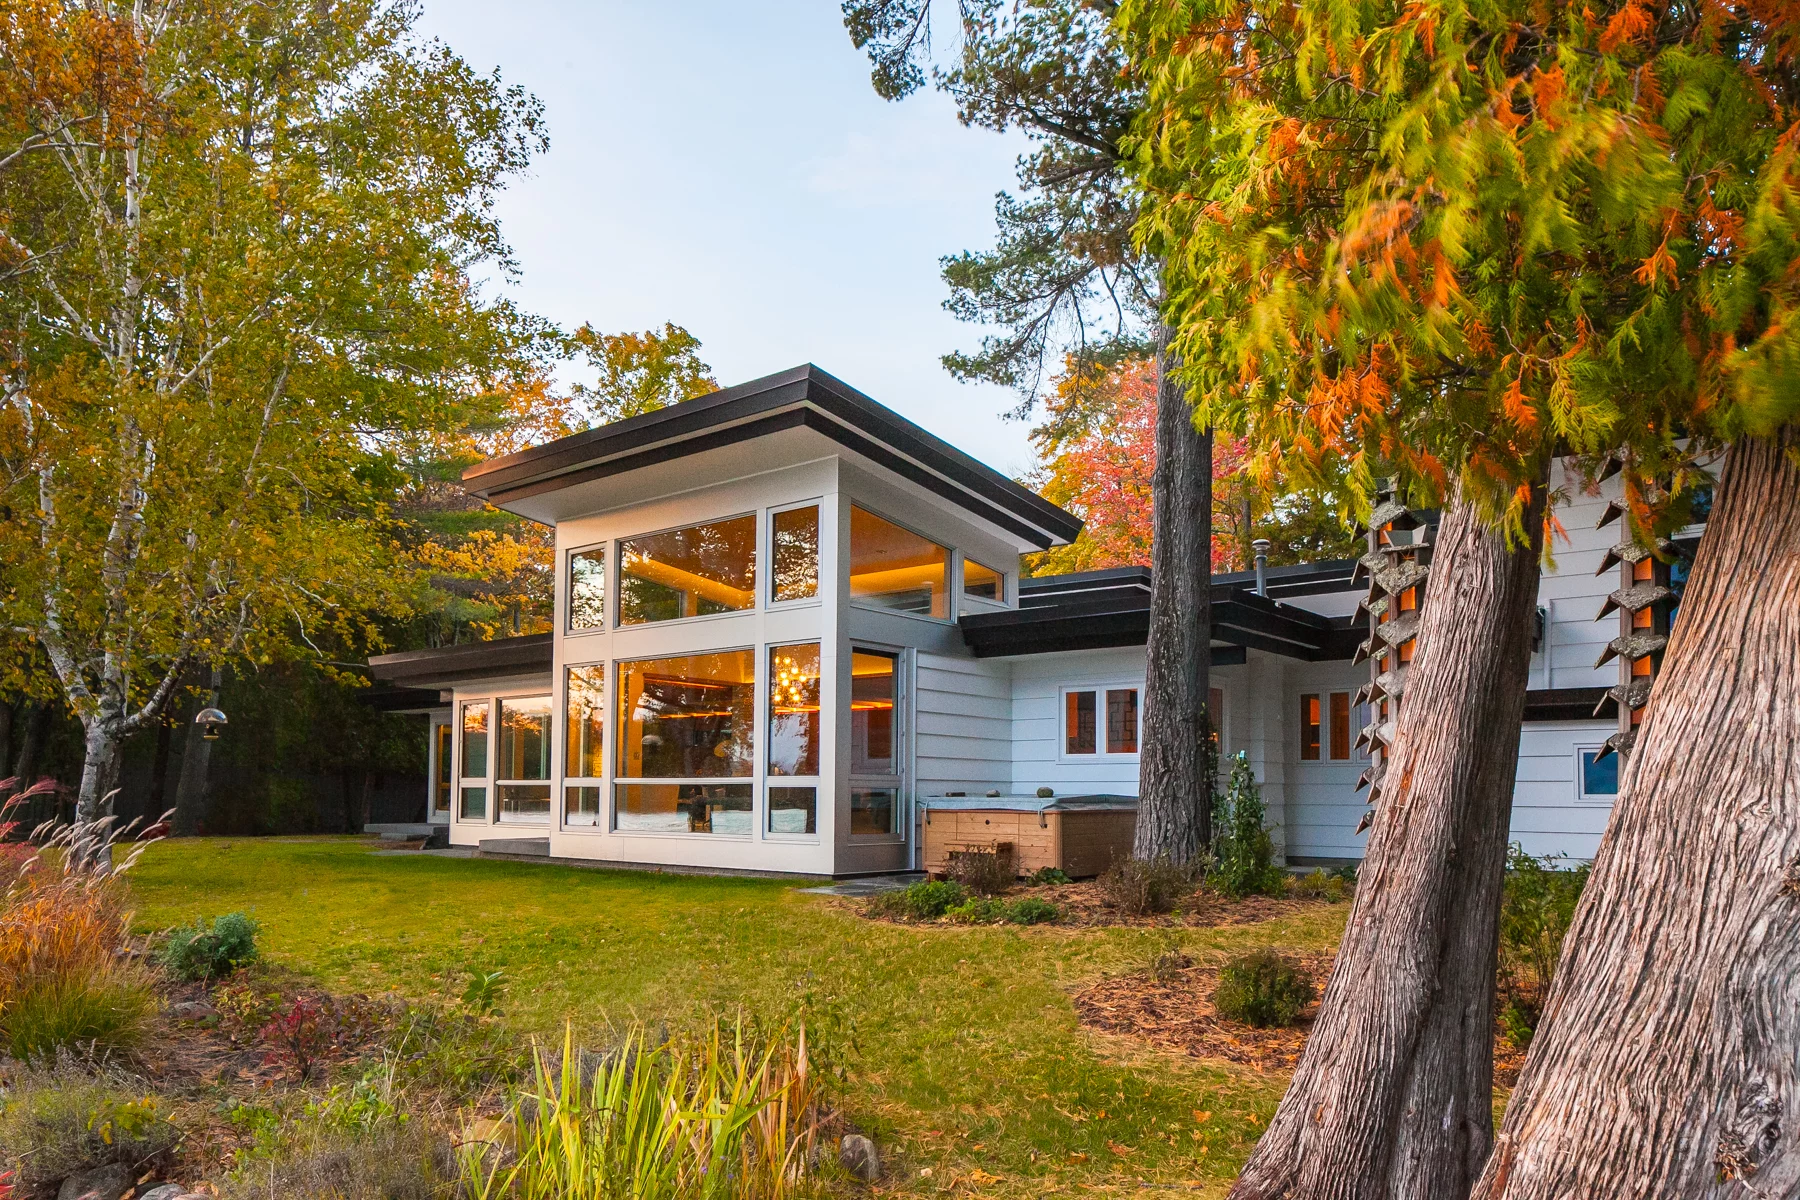 Western Window Systems' contemporary styling perfectly complements the Midcentury Modern architecture of the Glen Lake home that sits on a grassy lot surrounded by trees.